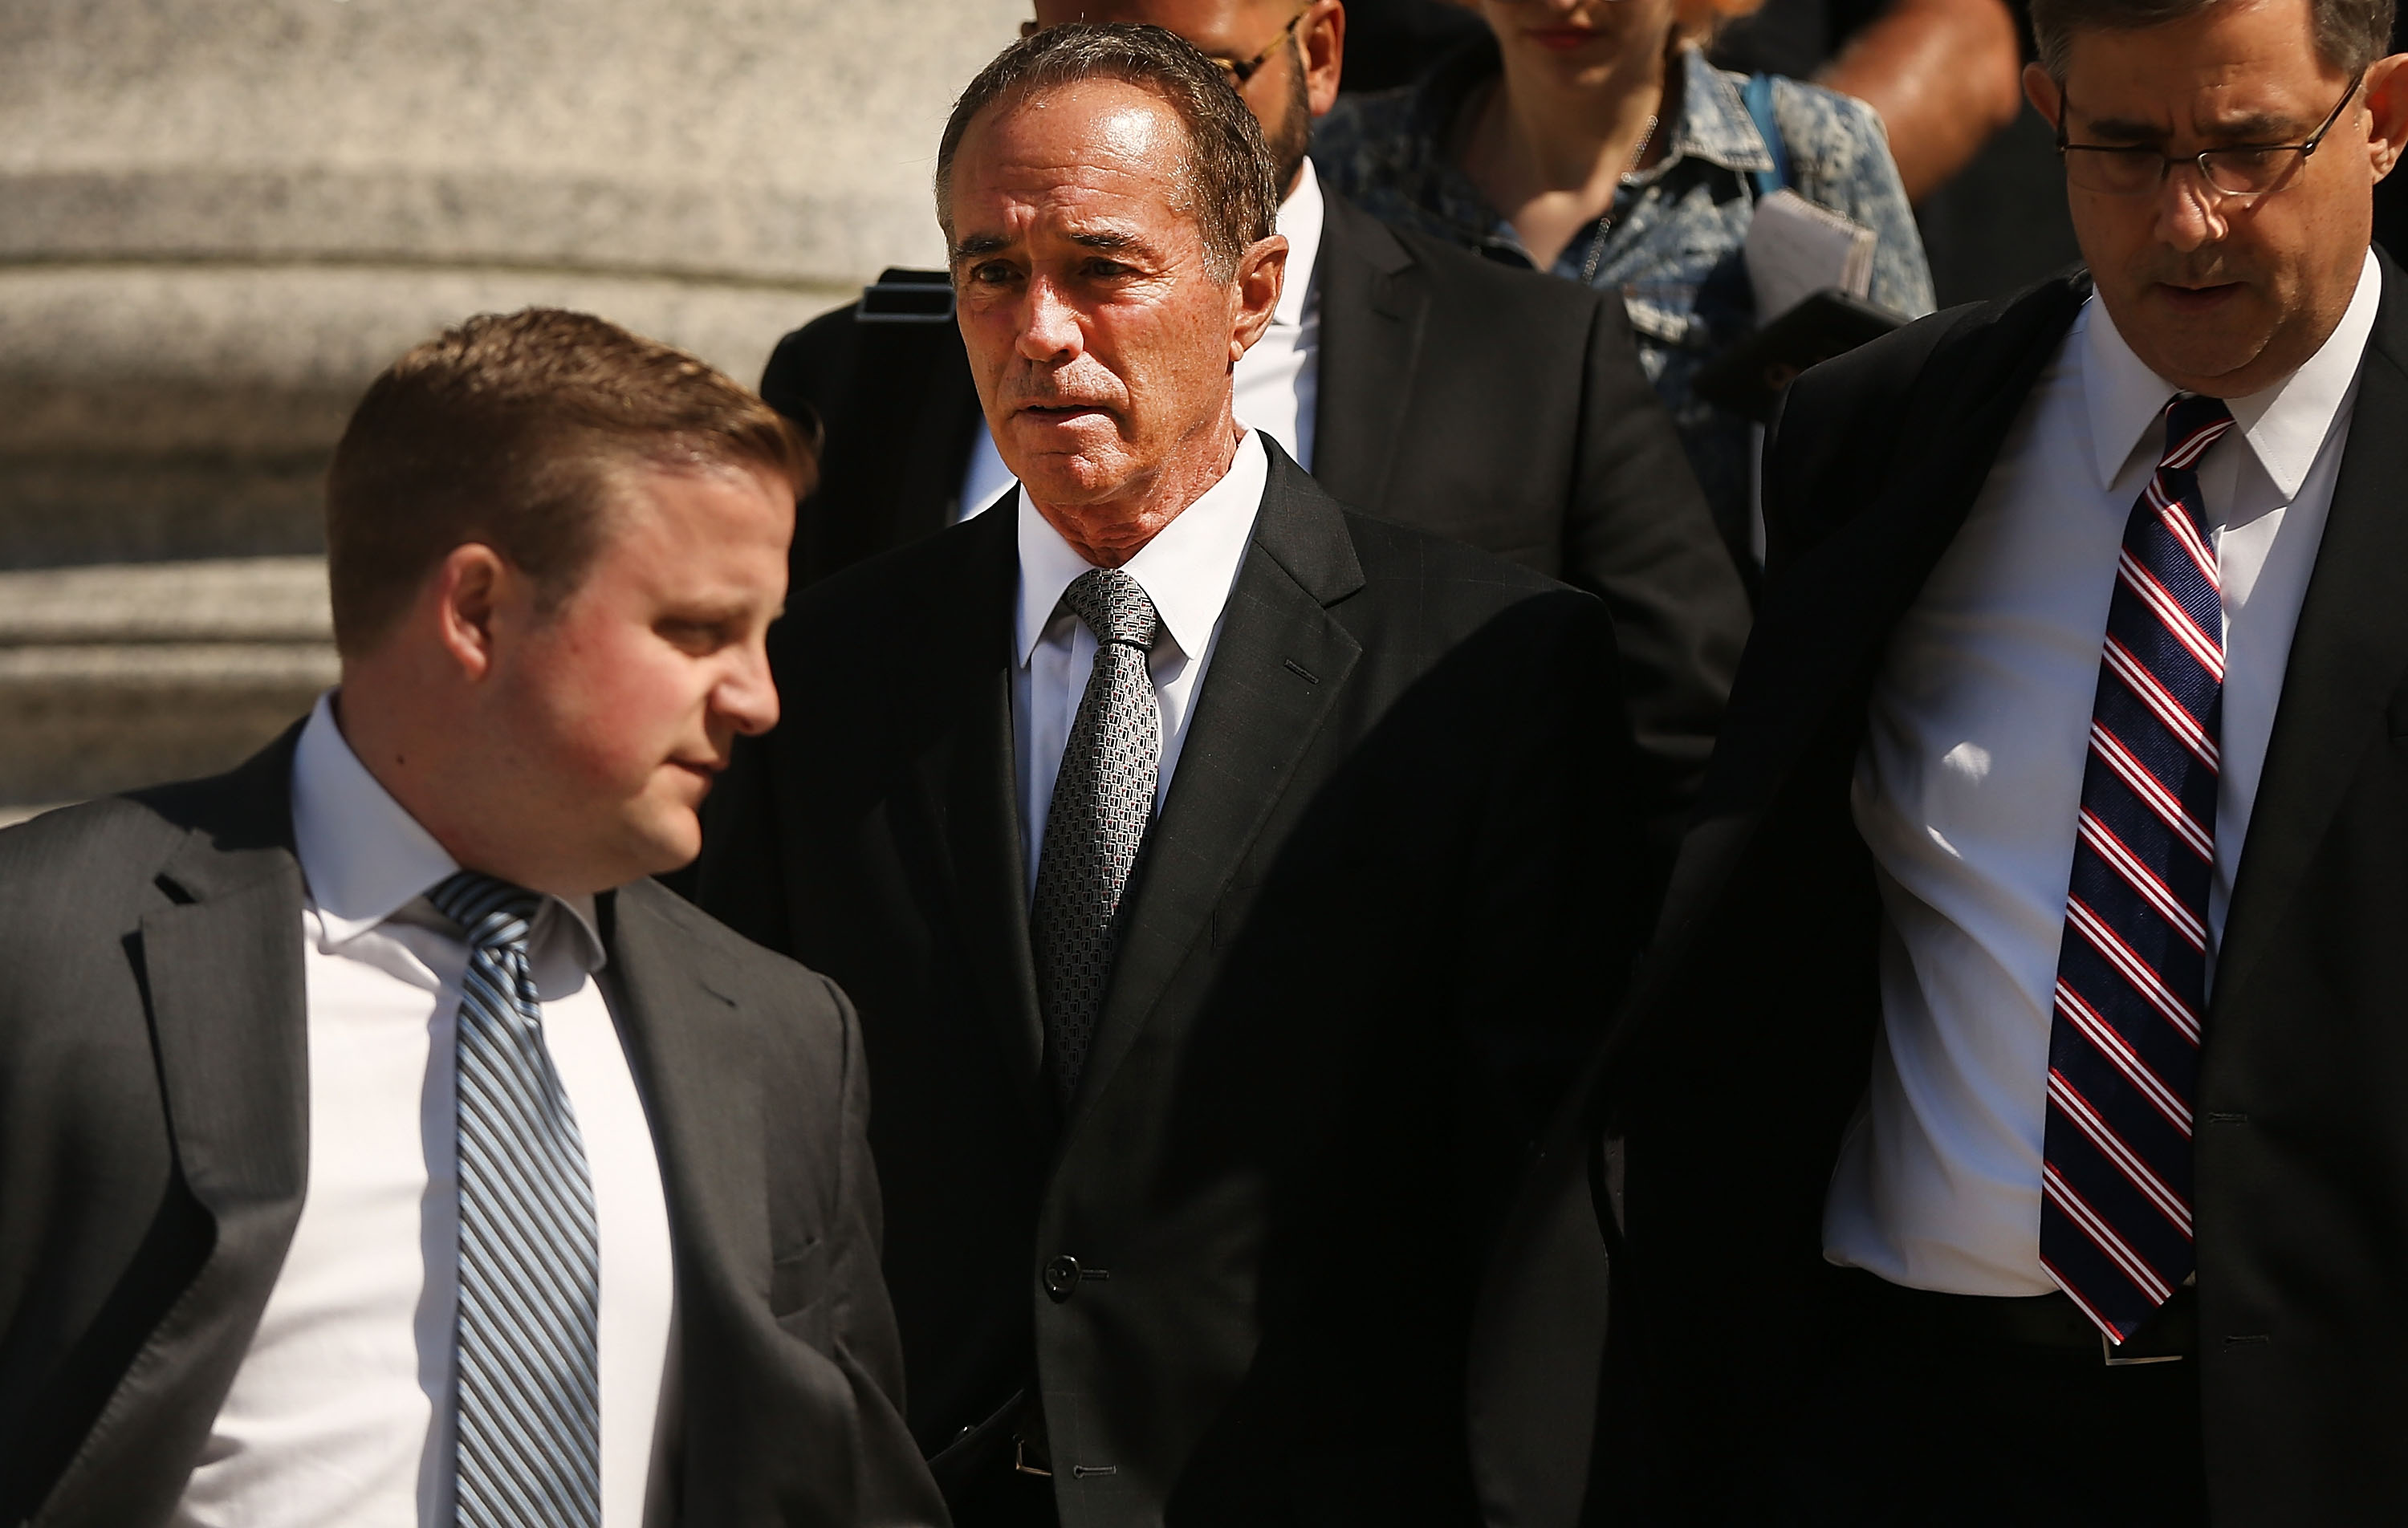 NEW YORK, NY - AUGUST 08: Rep. Chris Collins (R-NY) walks out of a New York court house after being charged with insider trading on August 8, 2018 in New York City. (Spencer Platt/Getty Images)